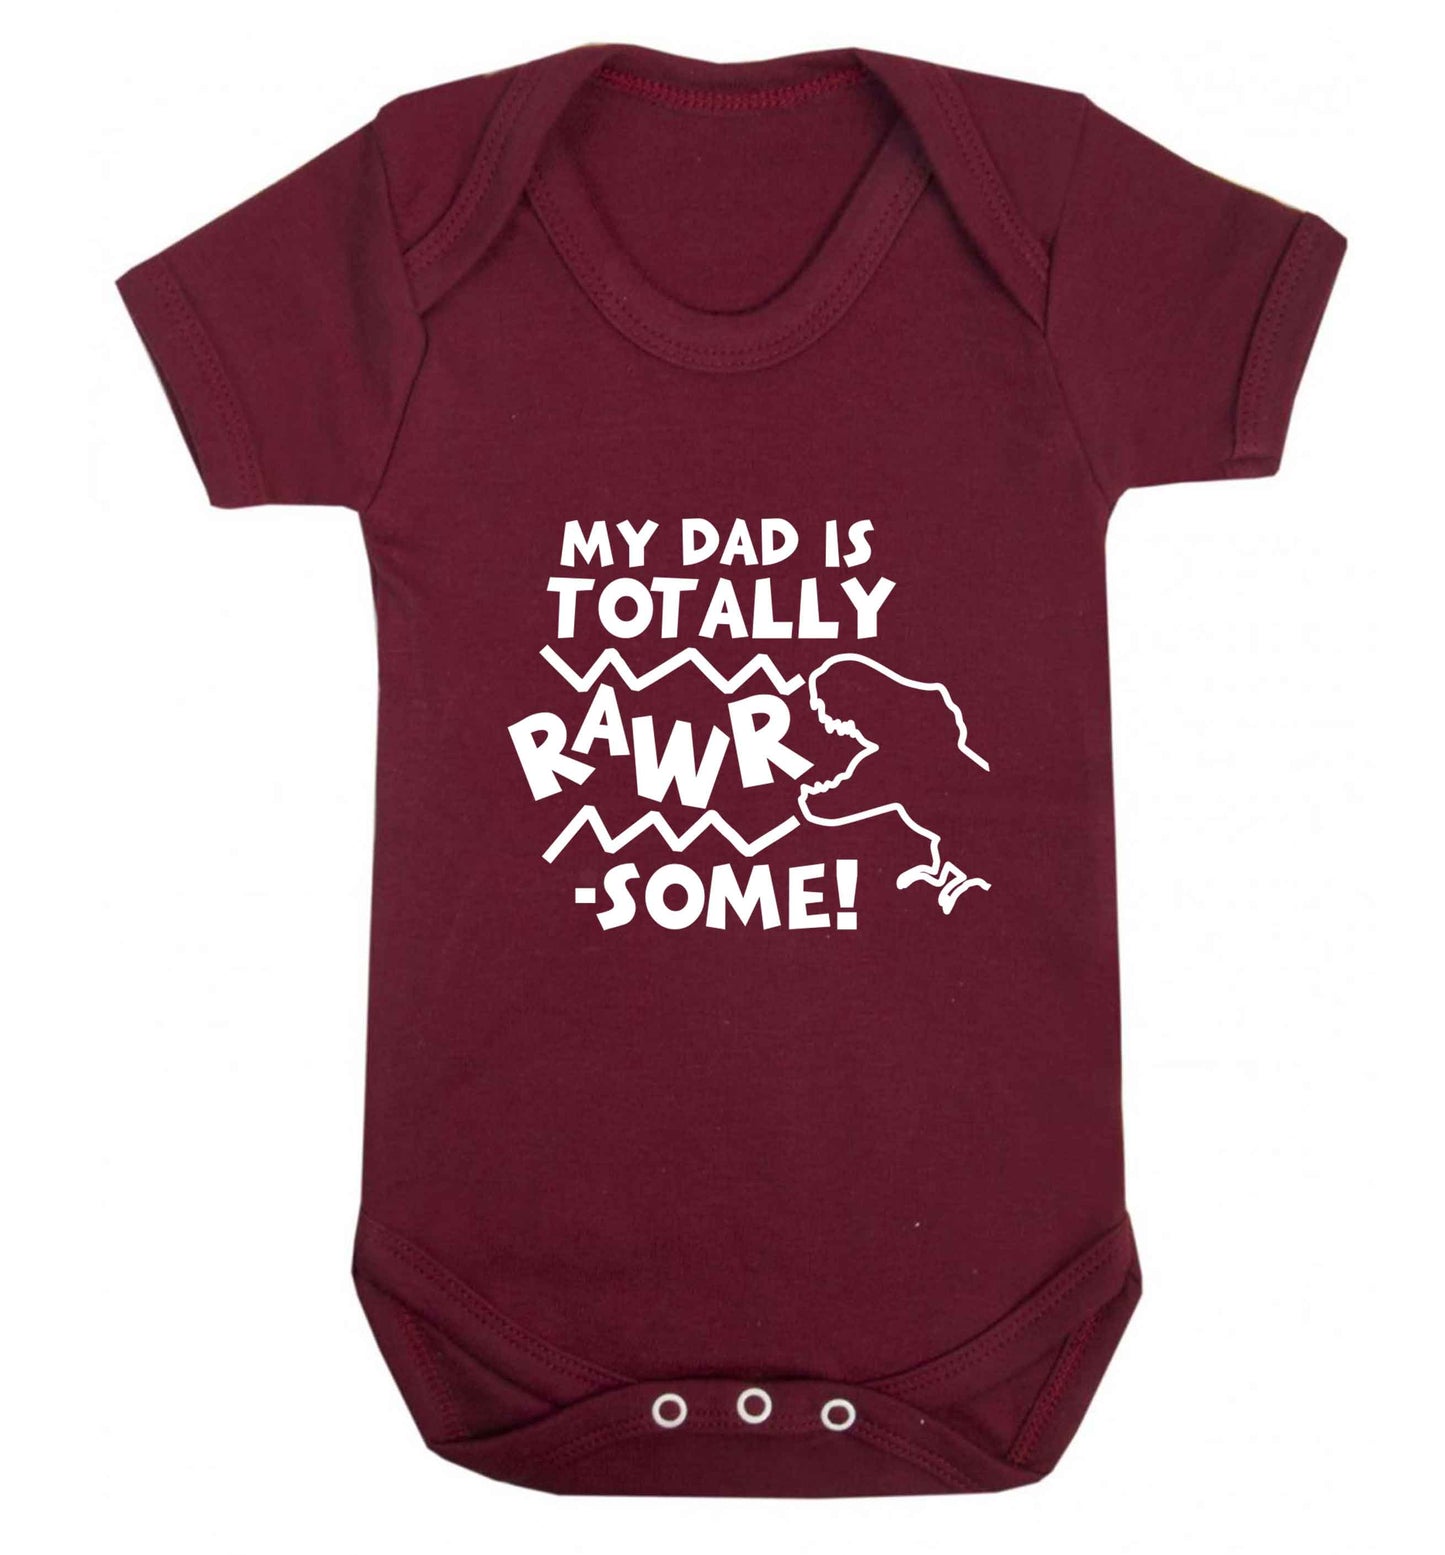 My dad is totally rawrsome baby vest maroon 18-24 months